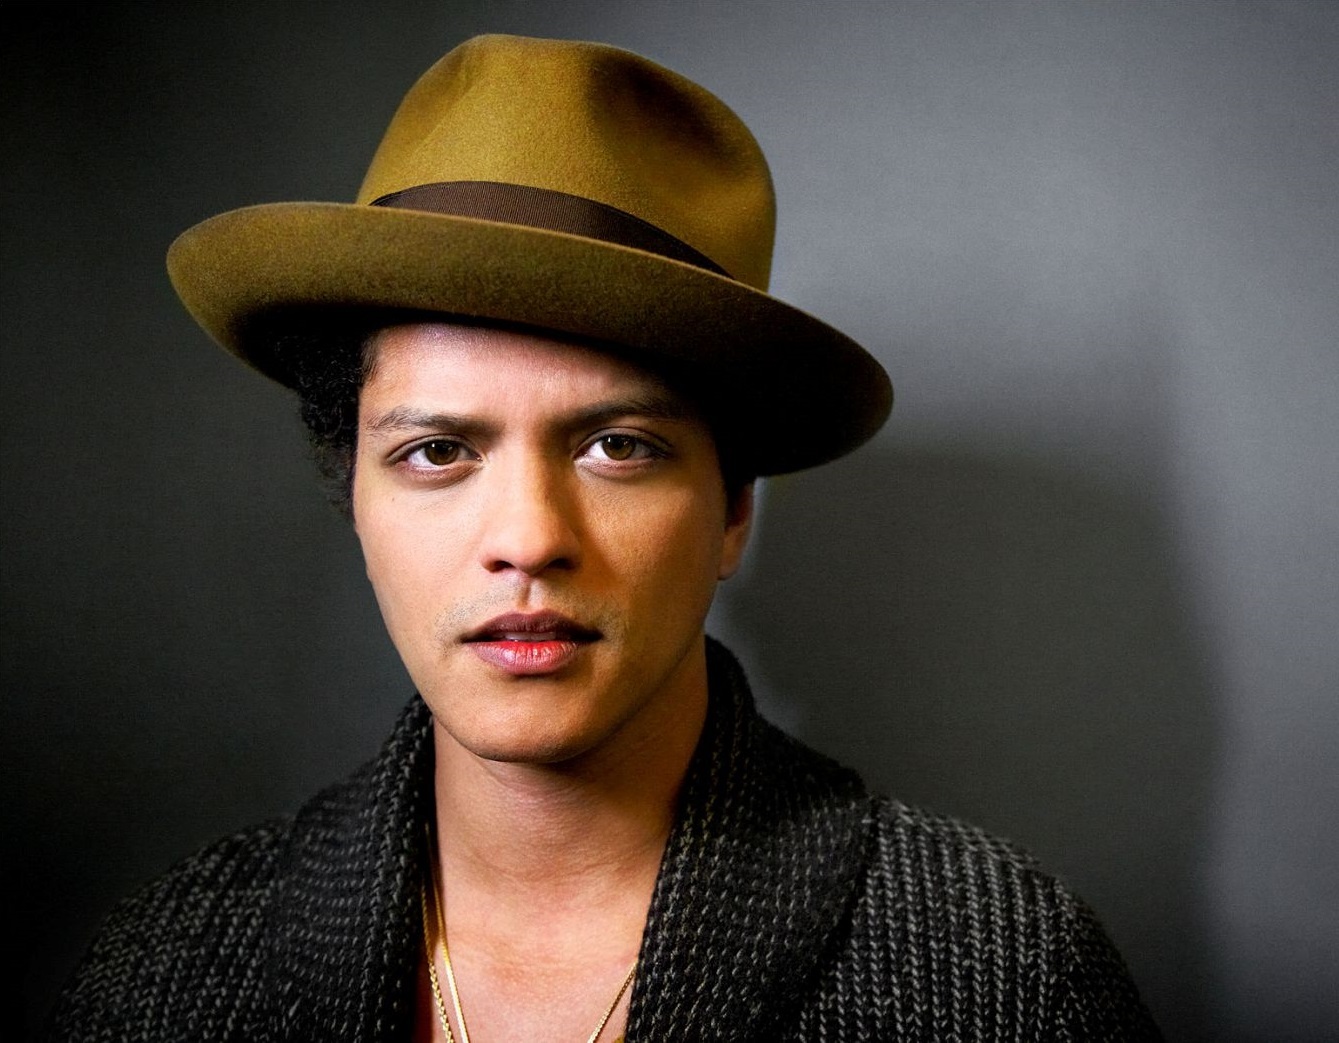 "Phenomenon" Bruno Mars causes fever in the music industry after 4 years of absence - 4